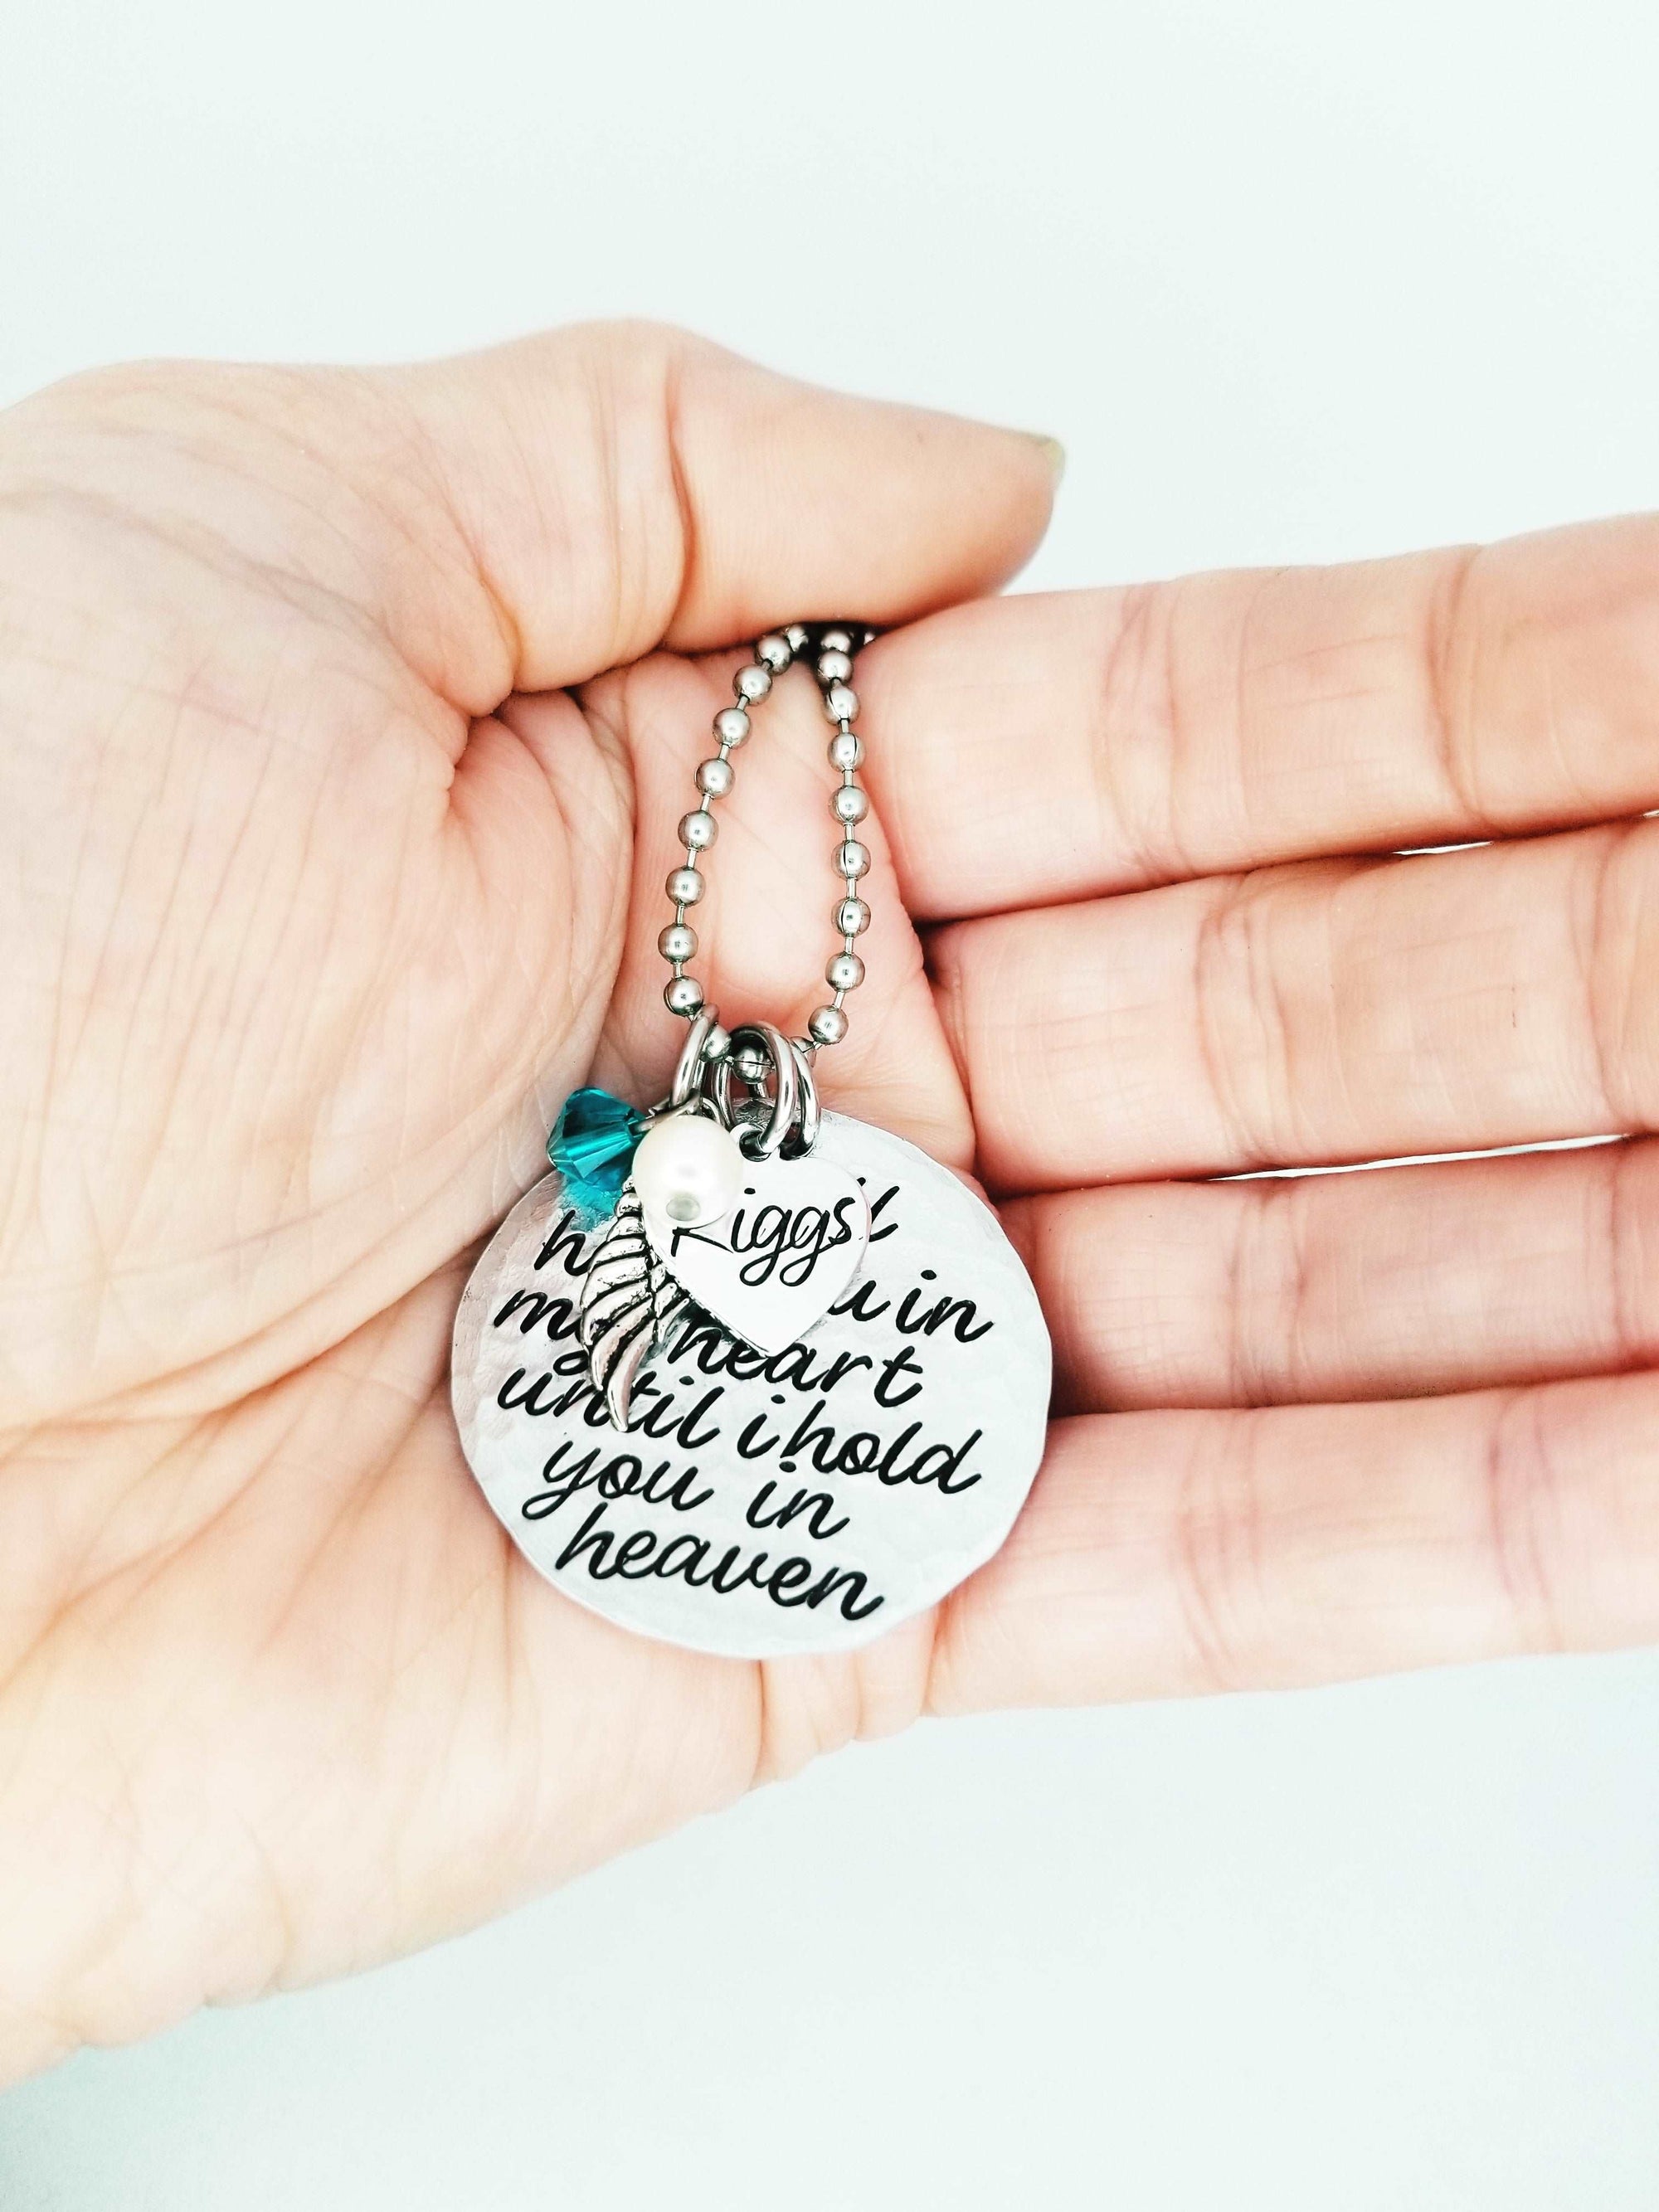 Forever in The Arms Of God, Memorial Necklace, Infant Loss, Child Loss, Miscarriage, Still Birth,